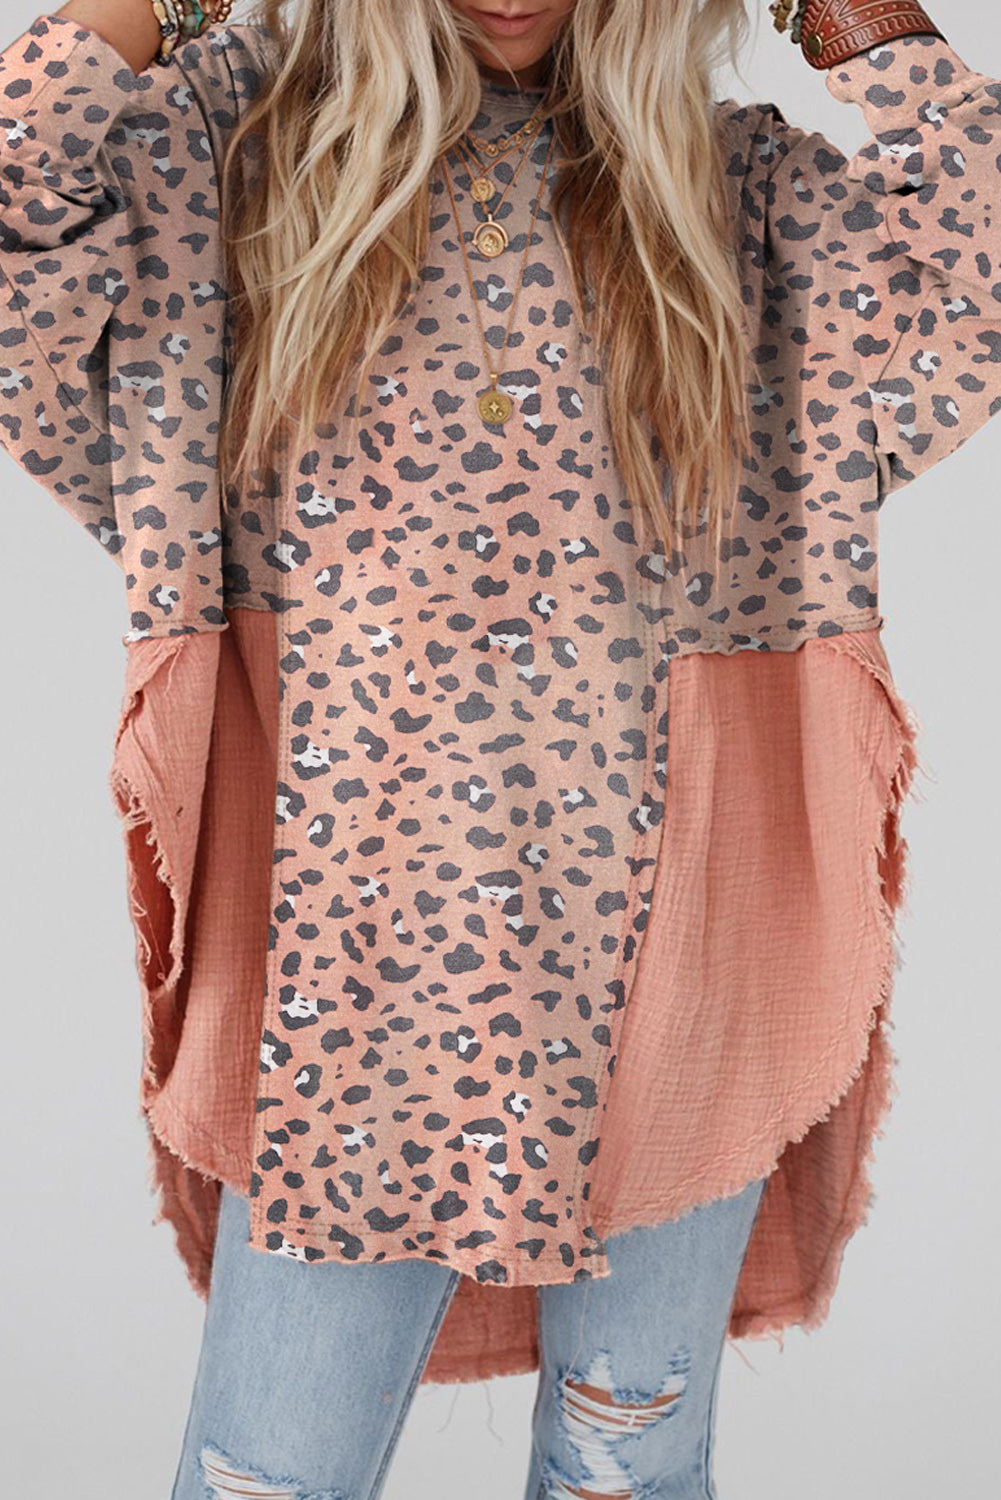 Textured Leopard Dropped Shoulder Blouse - Blush Pink / S - Women’s Clothing & Accessories - Shirts & Tops - 1 - 2024